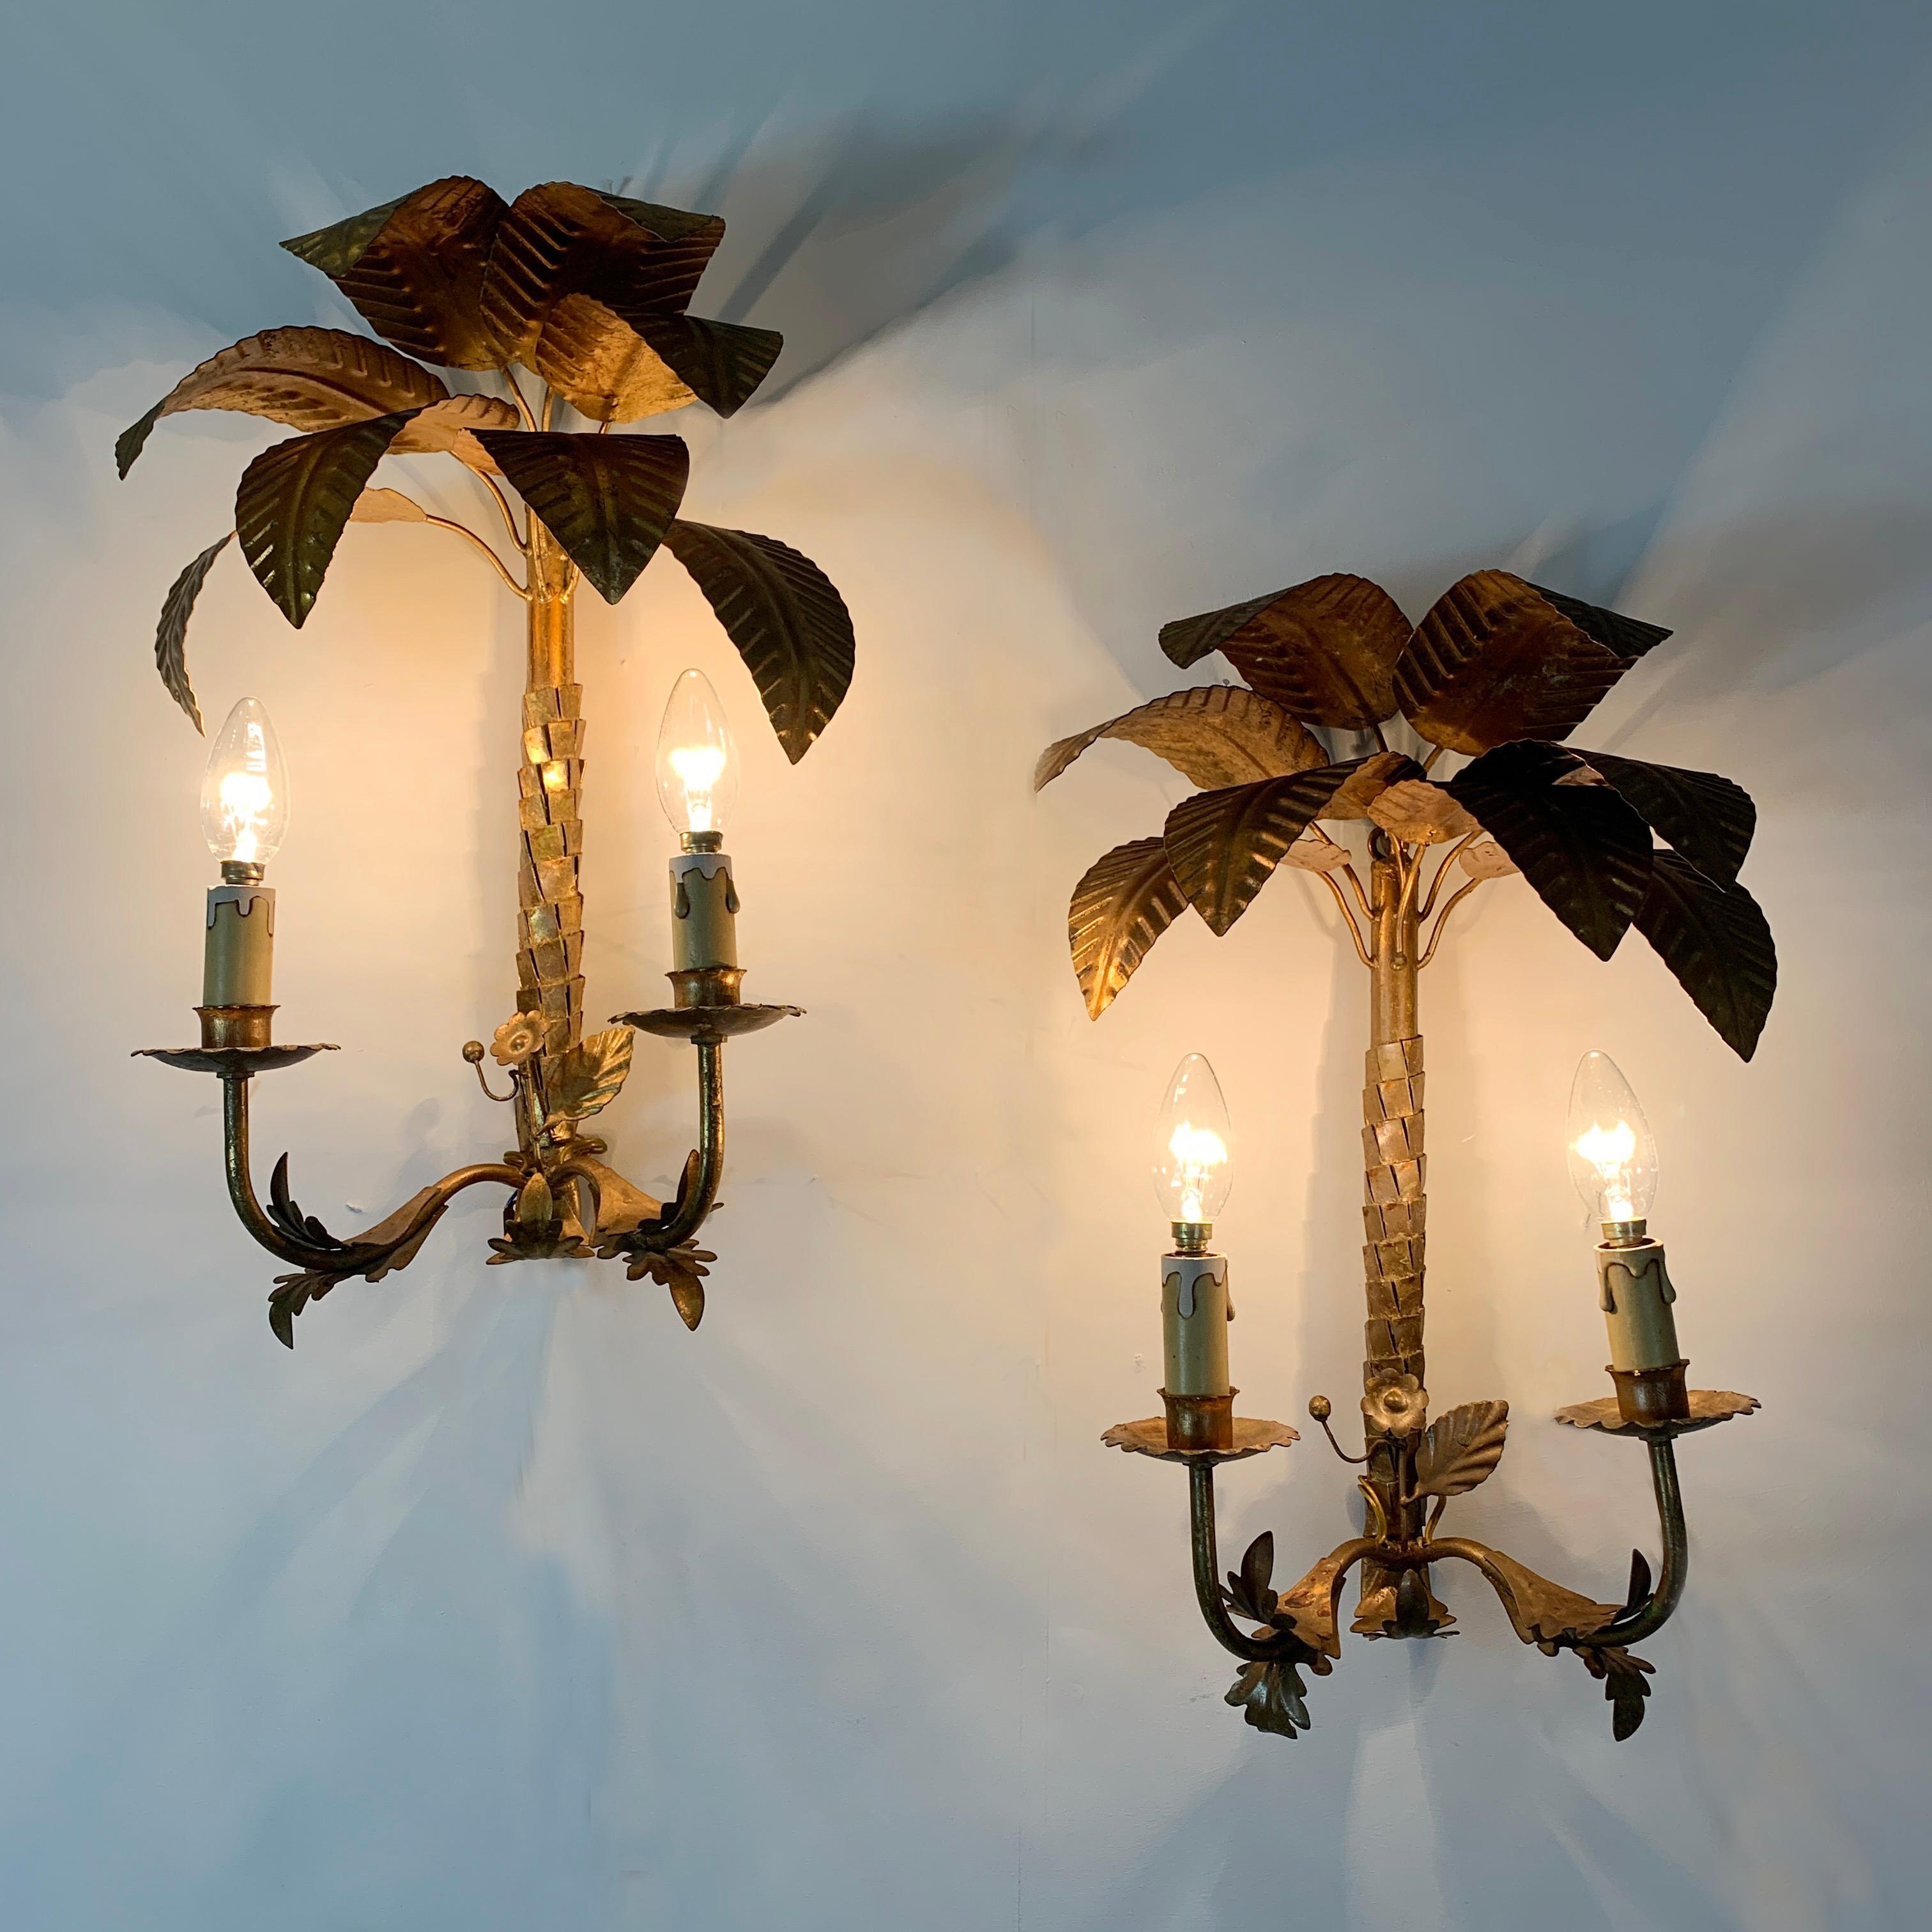 Maison Jansen attributed Palm Tree wall lights
Handcrafted gilt metal palm tree wall lights
Attributed to Maison Jansen, circa 1960s
Measures: 50Cm height, 32Cm width, 18.5Cm depth
Fabulous textured stems with large palm leaf tops
The lights